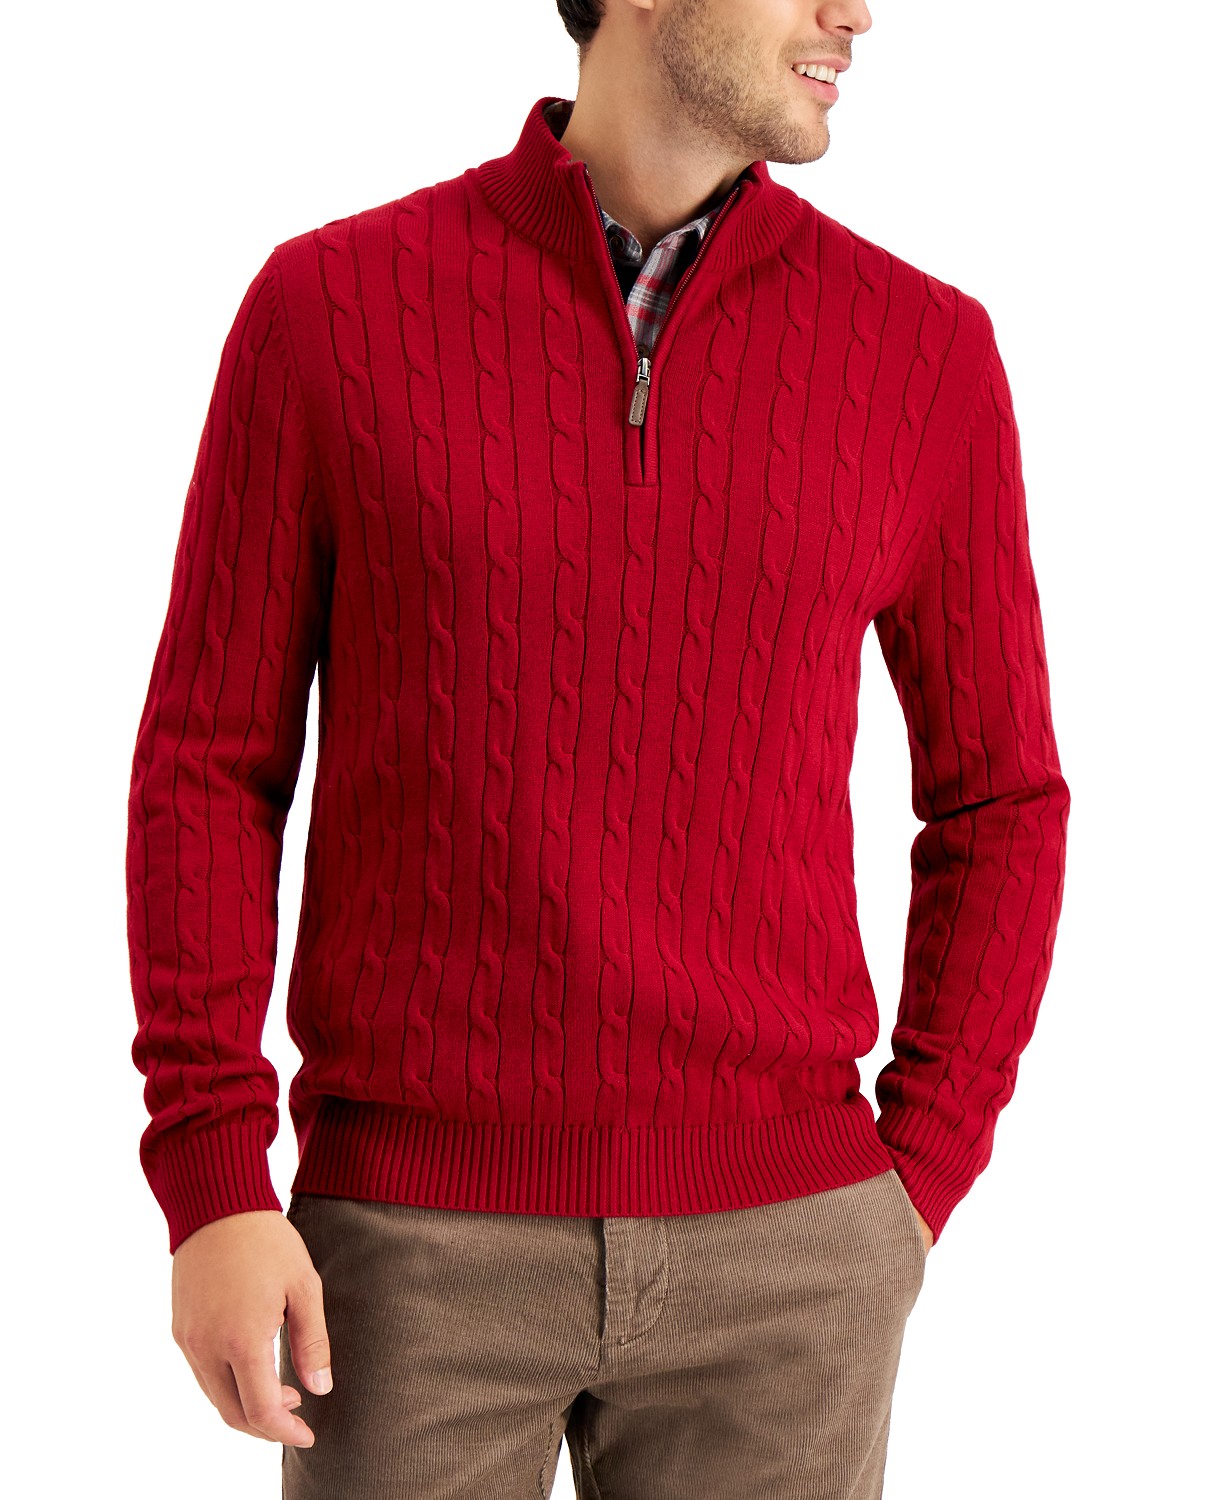 woocommerce-673321-2209615.cloudwaysapps.com-club-room-mens-red-cable-knit-quarter-zip-sweater